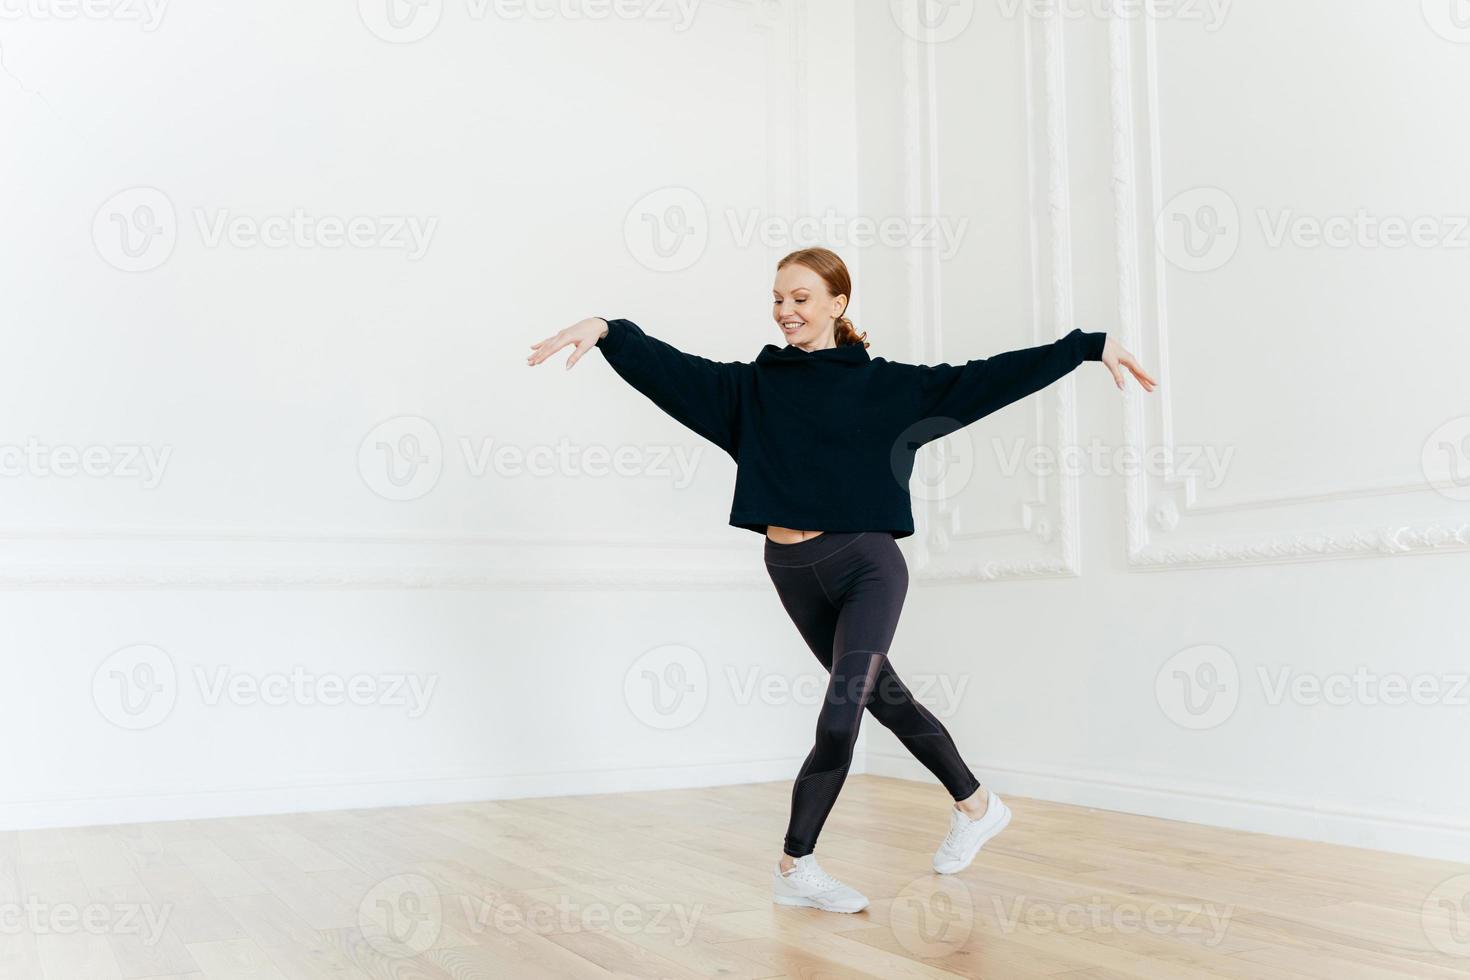 Professional female ballerina practices dance in hall, stretches hands, stands with crossed legs, has gentle smile on face, dressed in black sportswear, enjoys spare time for hobby. Healthy lifestyle photo